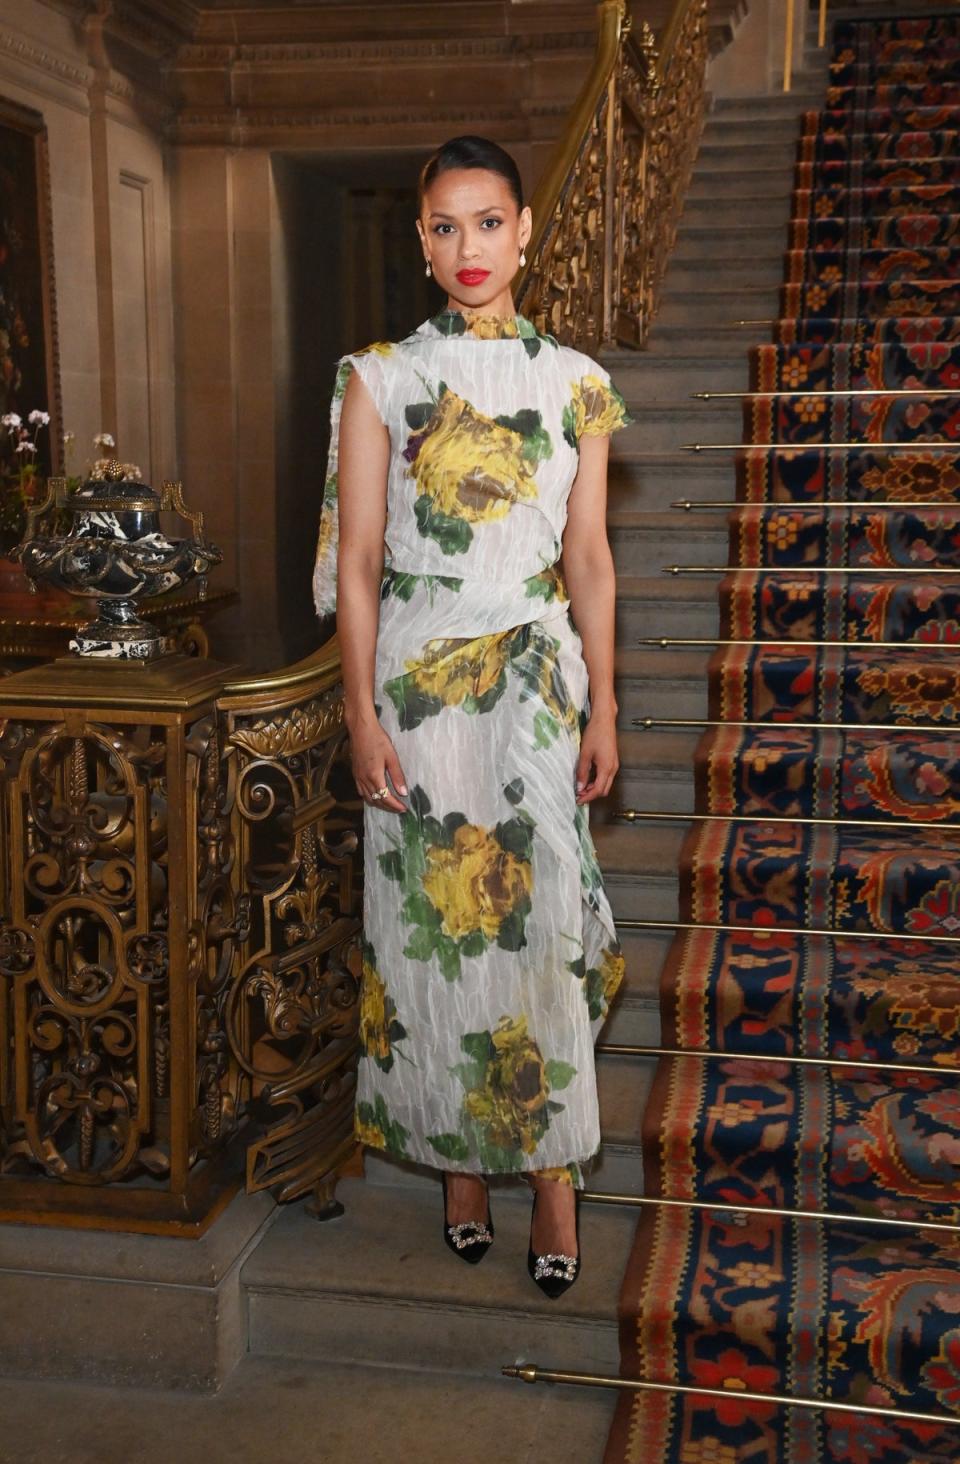 Gugu Mbatha-Raw attends a special event celebrating the opening of the new exhibition 